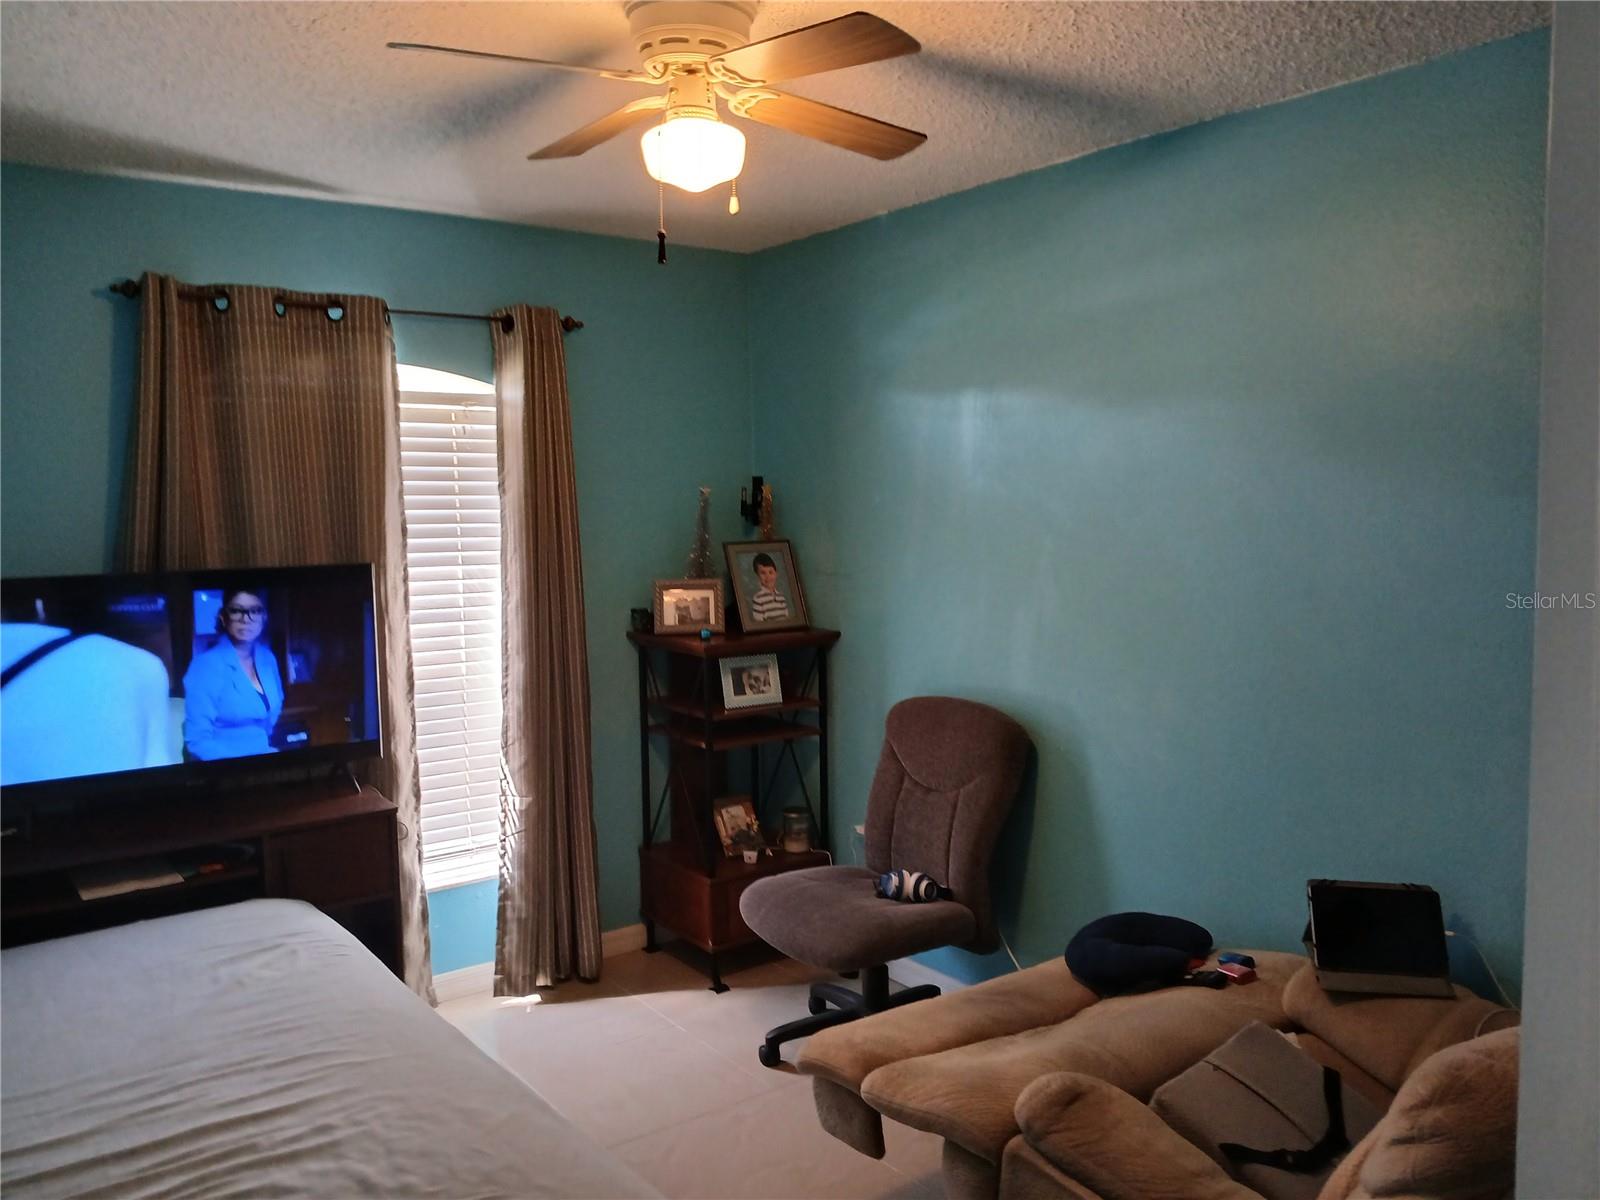 Third bedroom or office..Large window..